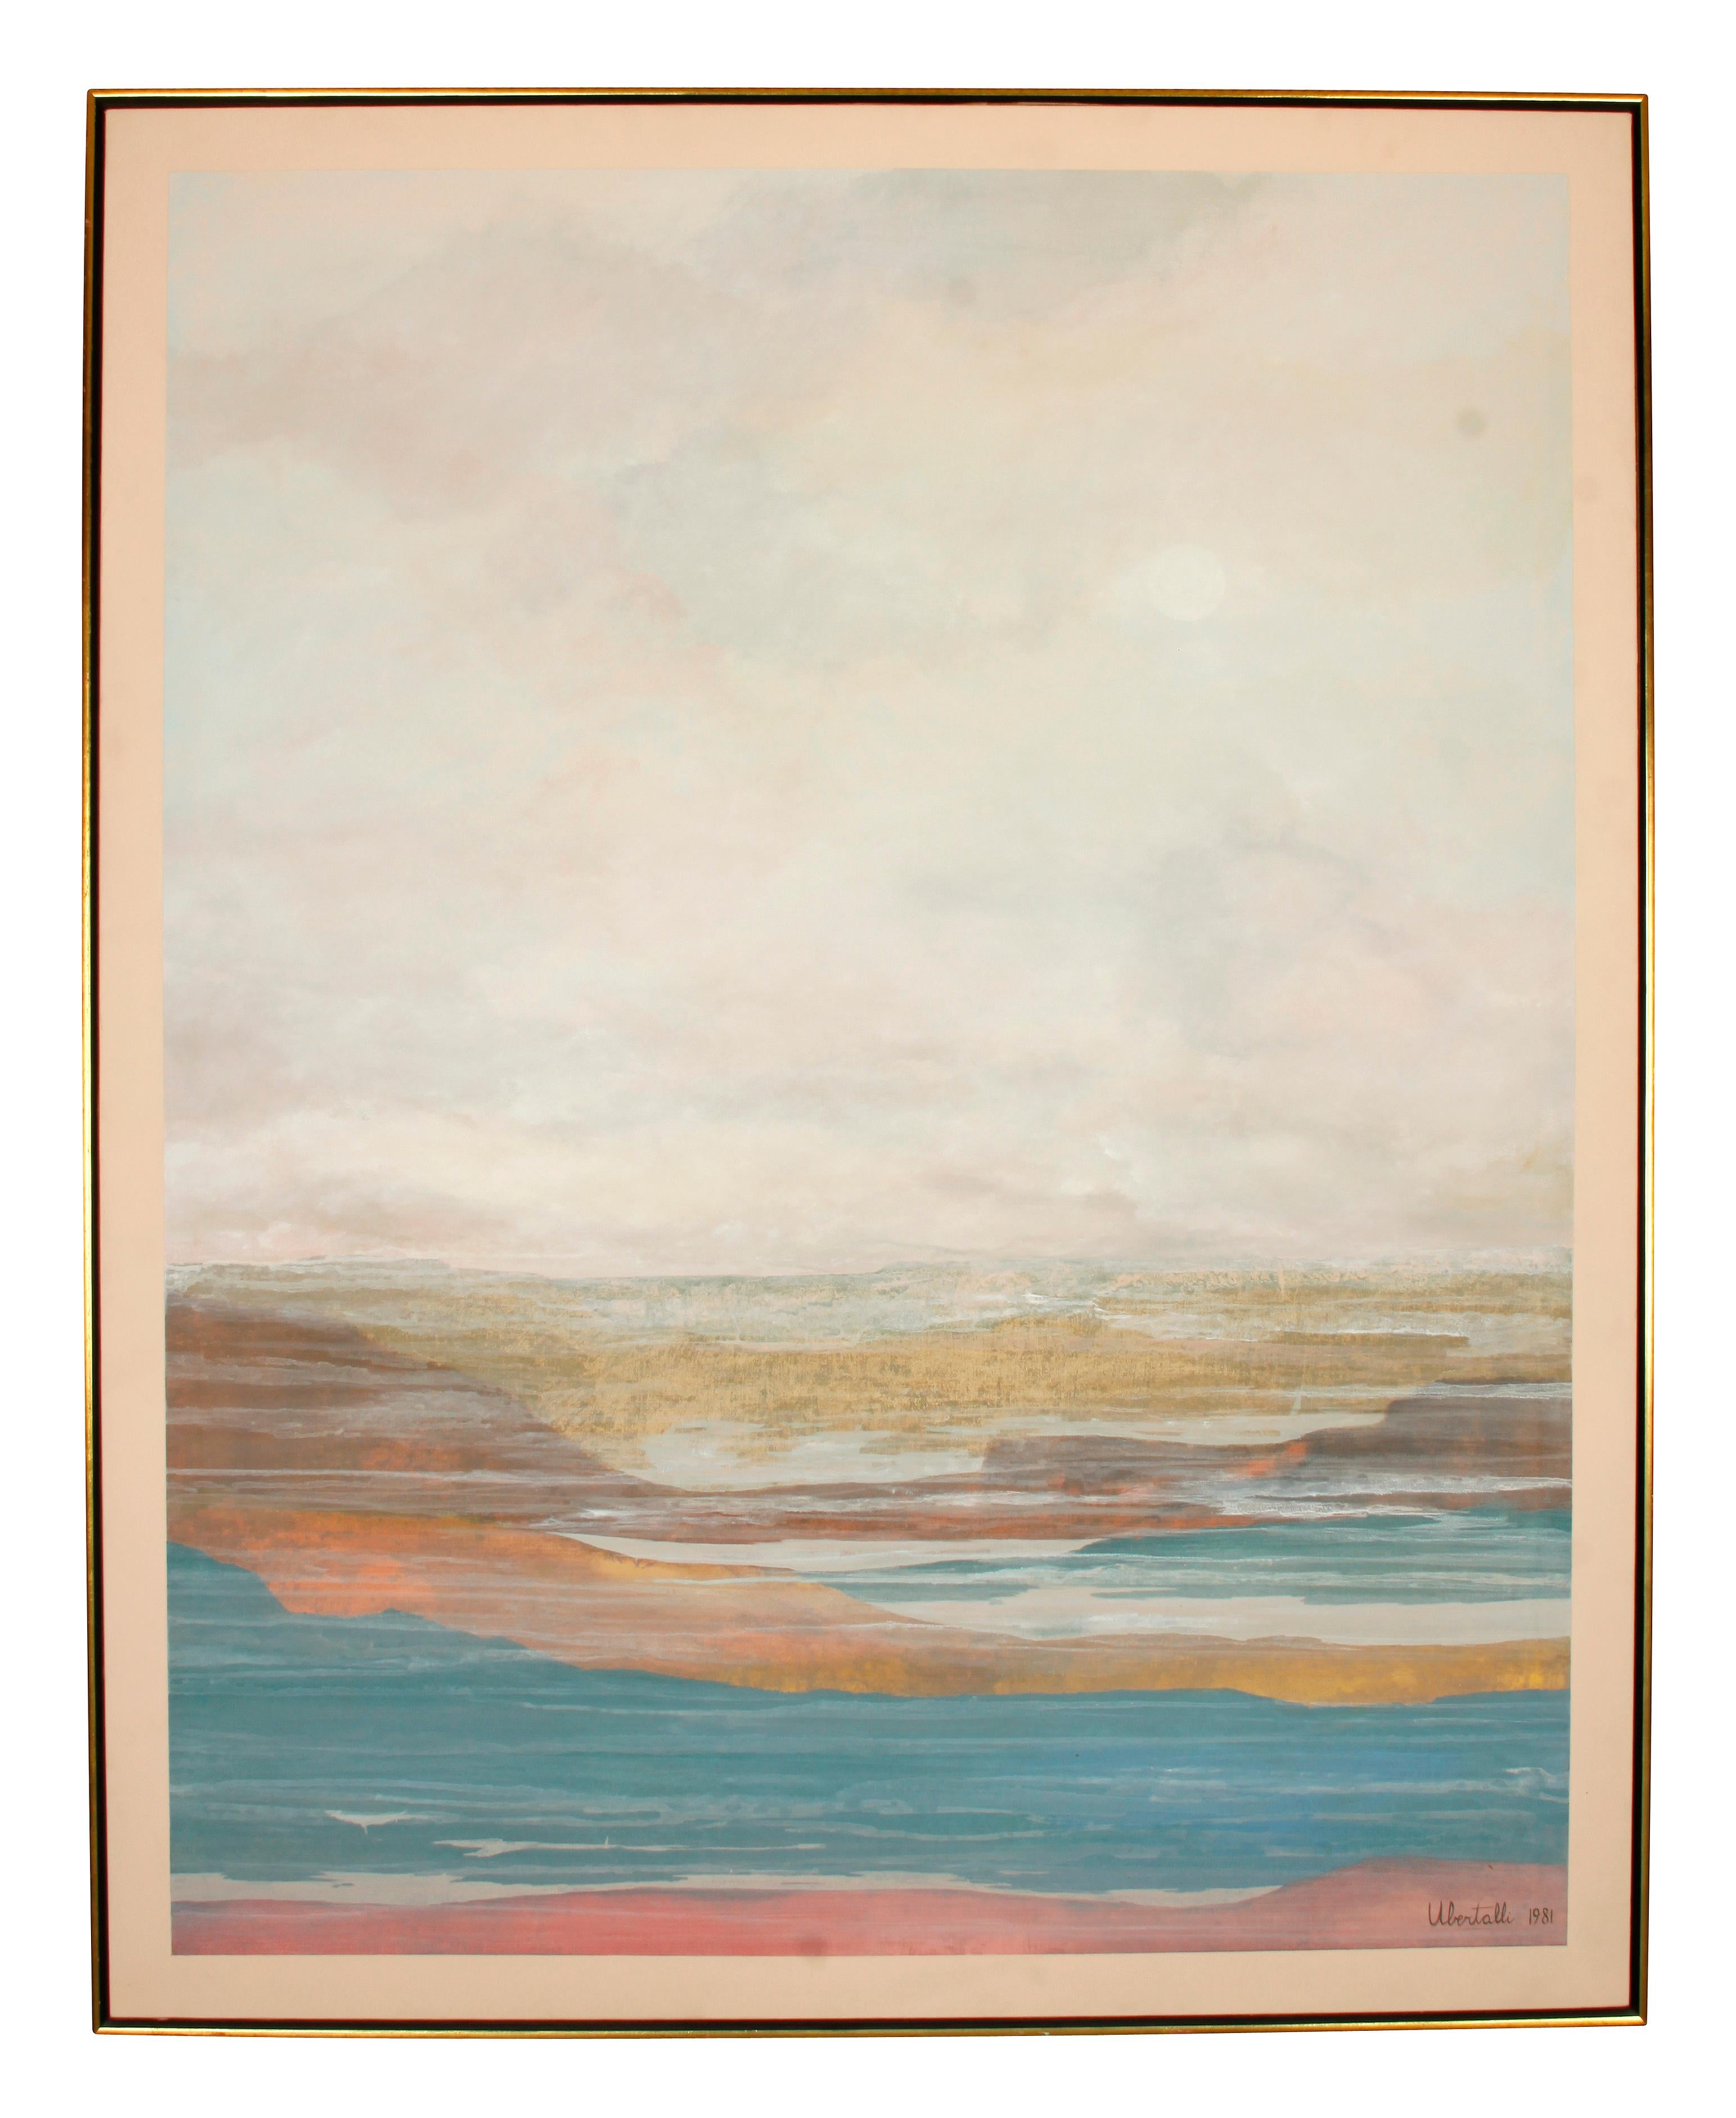 Modern oil on canvas abstract painting of the California coast by H. Ubertali.